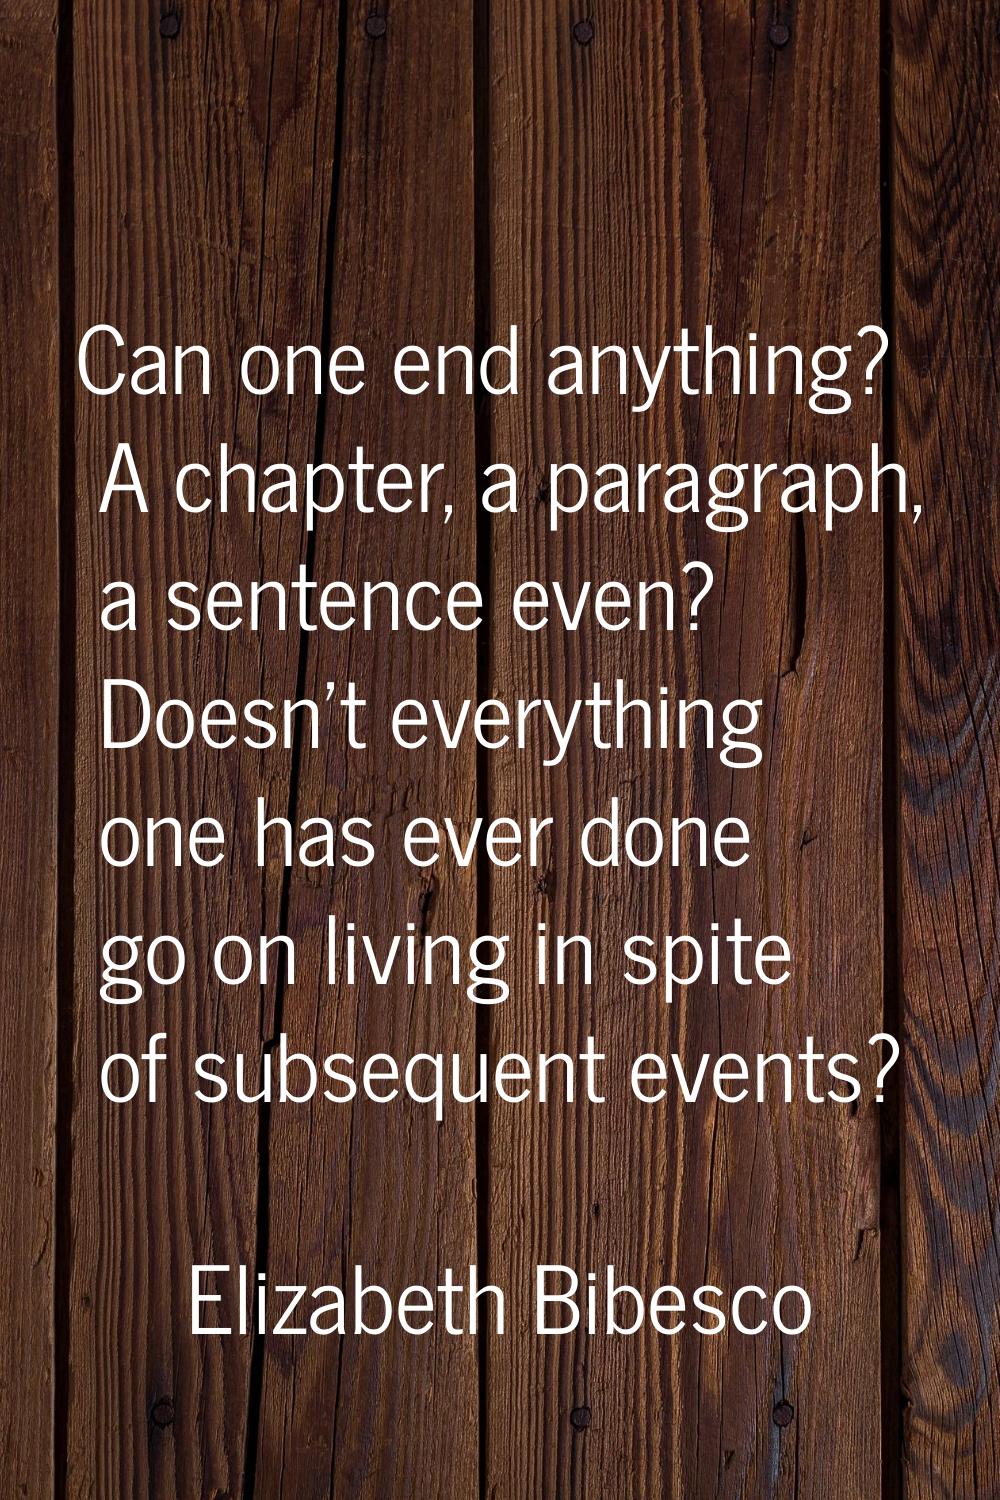 Can one end anything? A chapter, a paragraph, a sentence even? Doesn't everything one has ever done